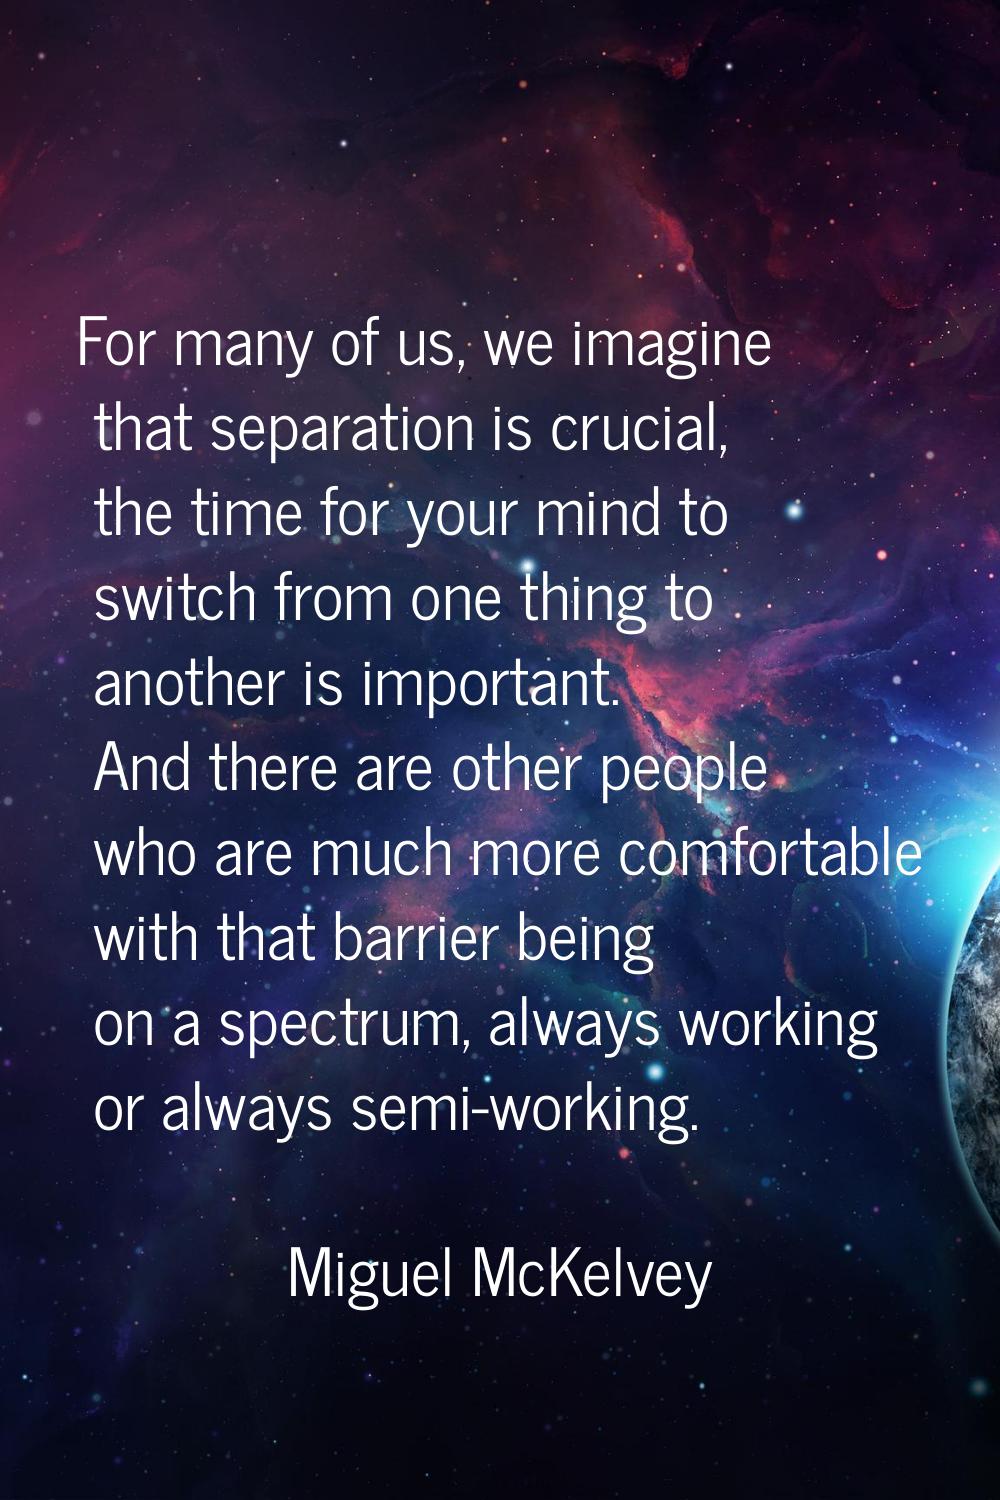 For many of us, we imagine that separation is crucial, the time for your mind to switch from one th